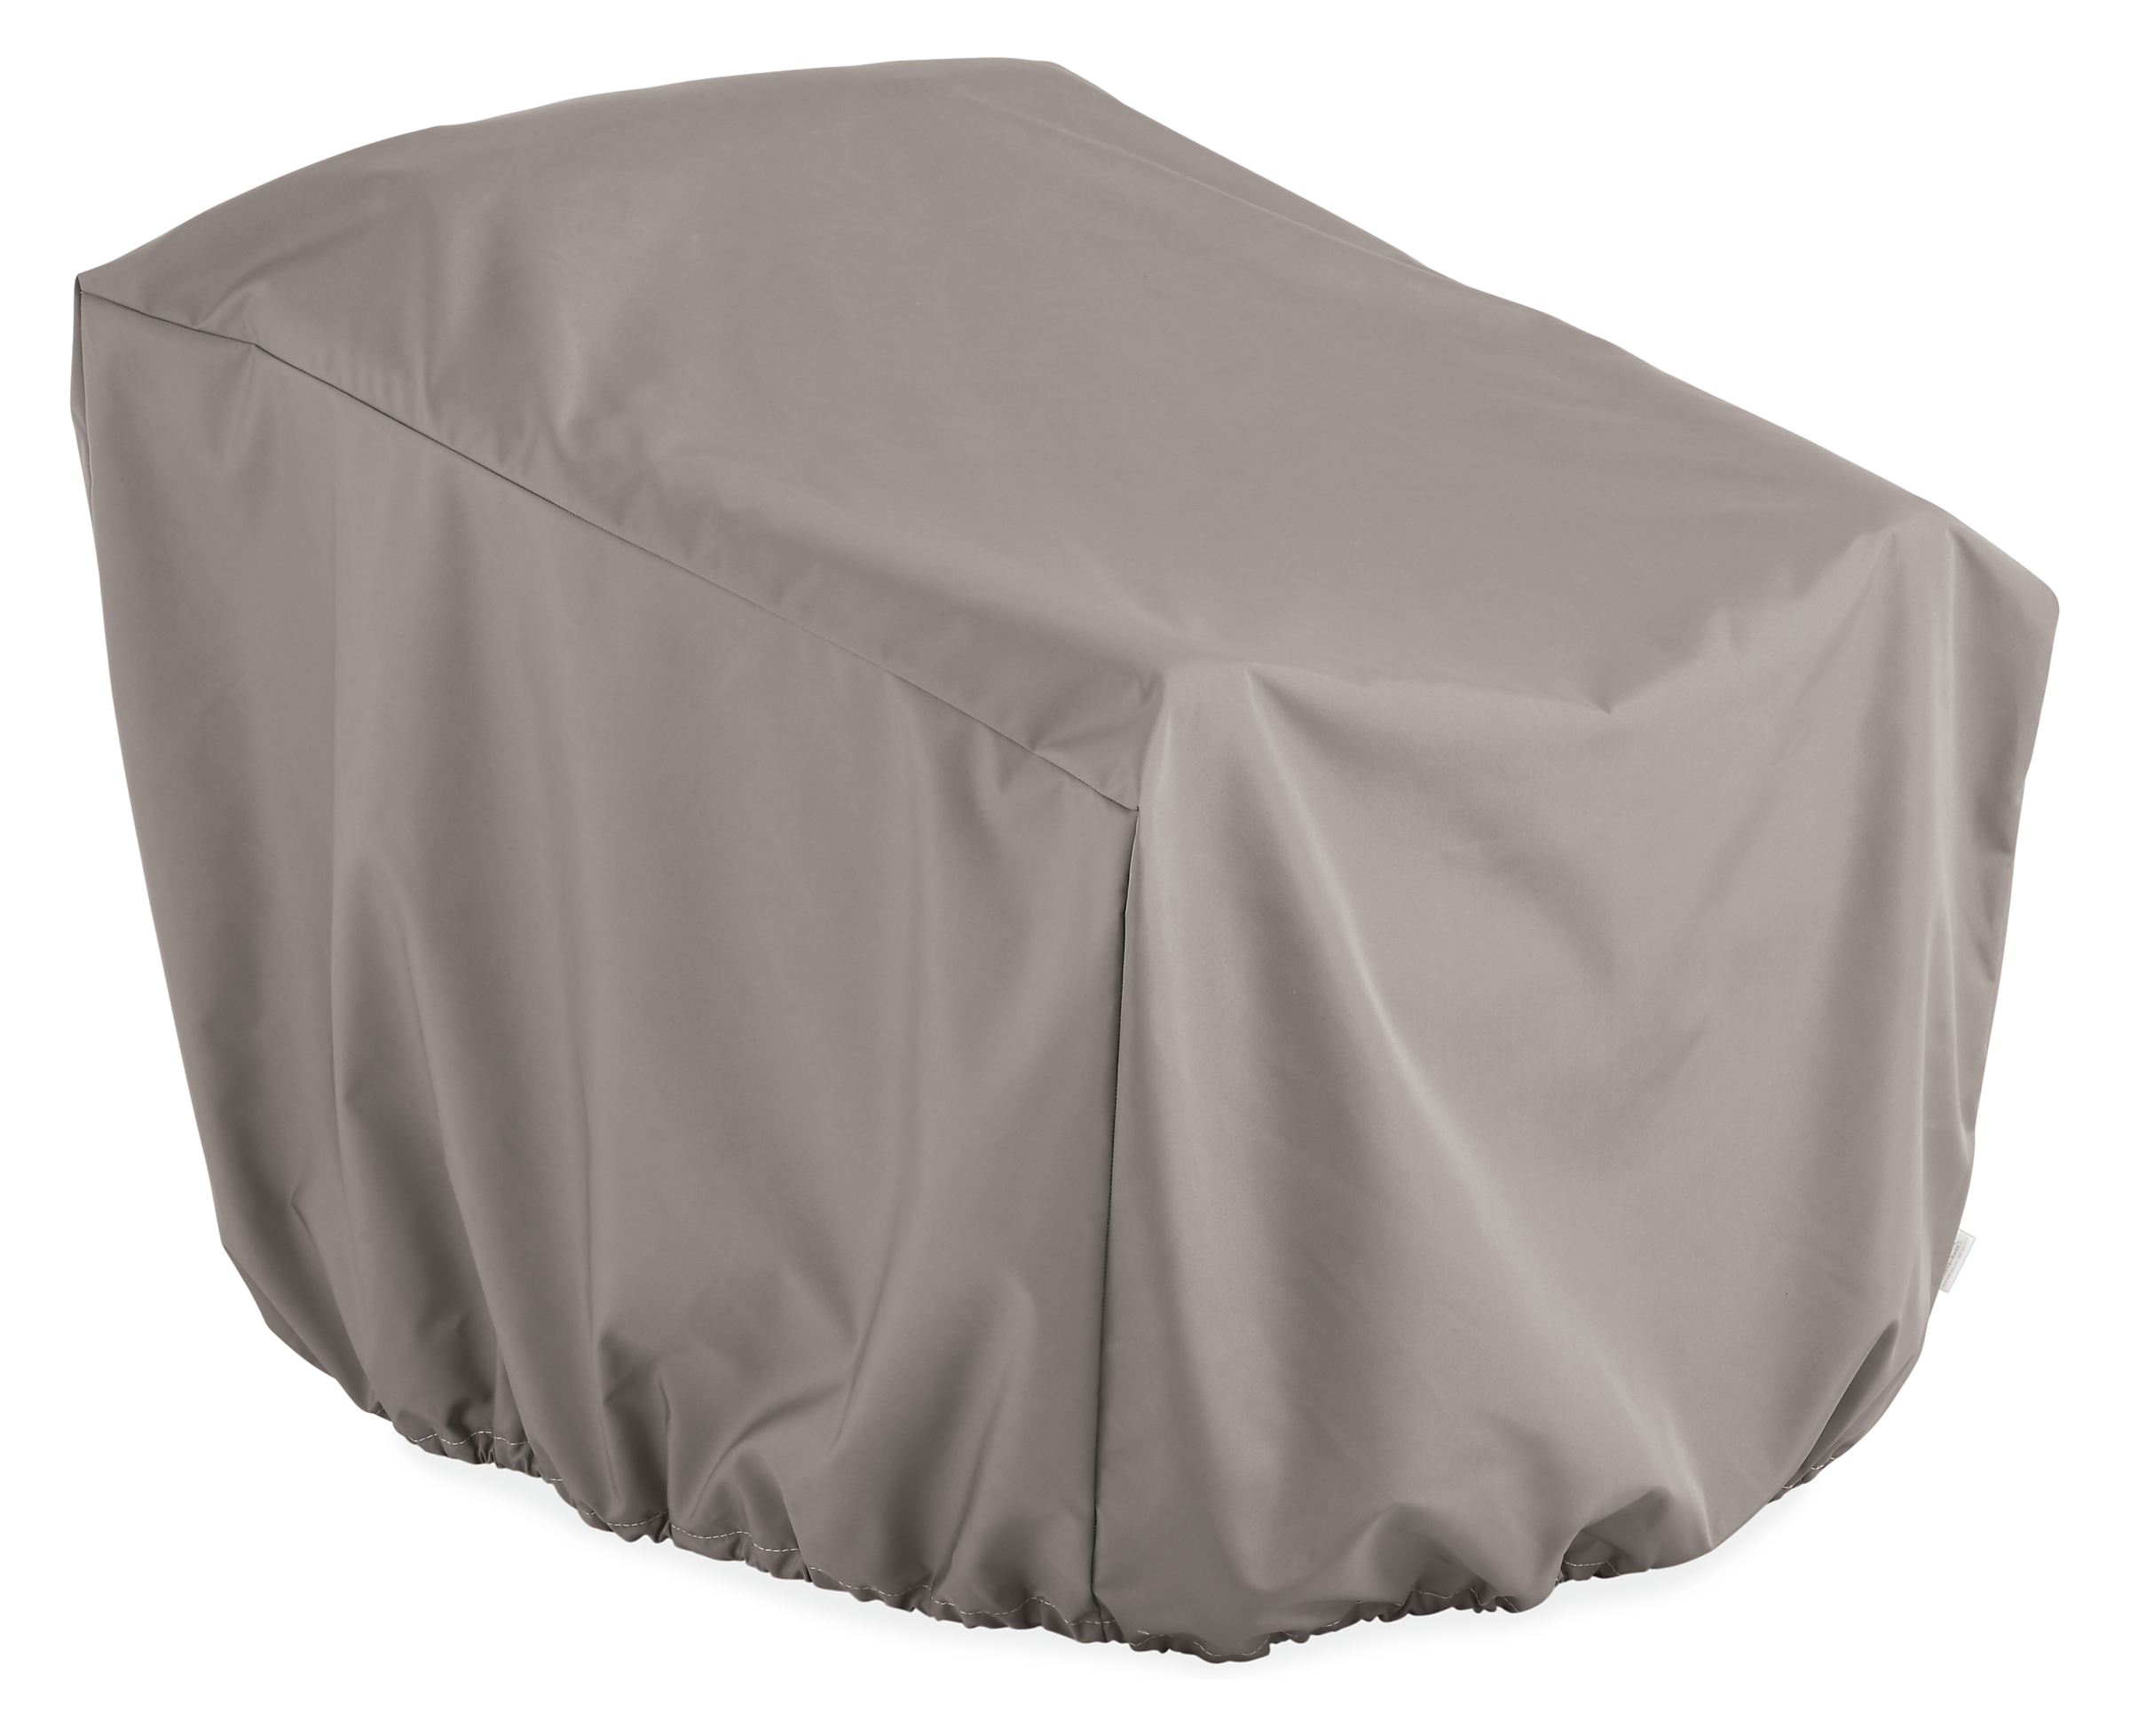 Outdoor Cover for Chair 54 diam 32h with Drawstring